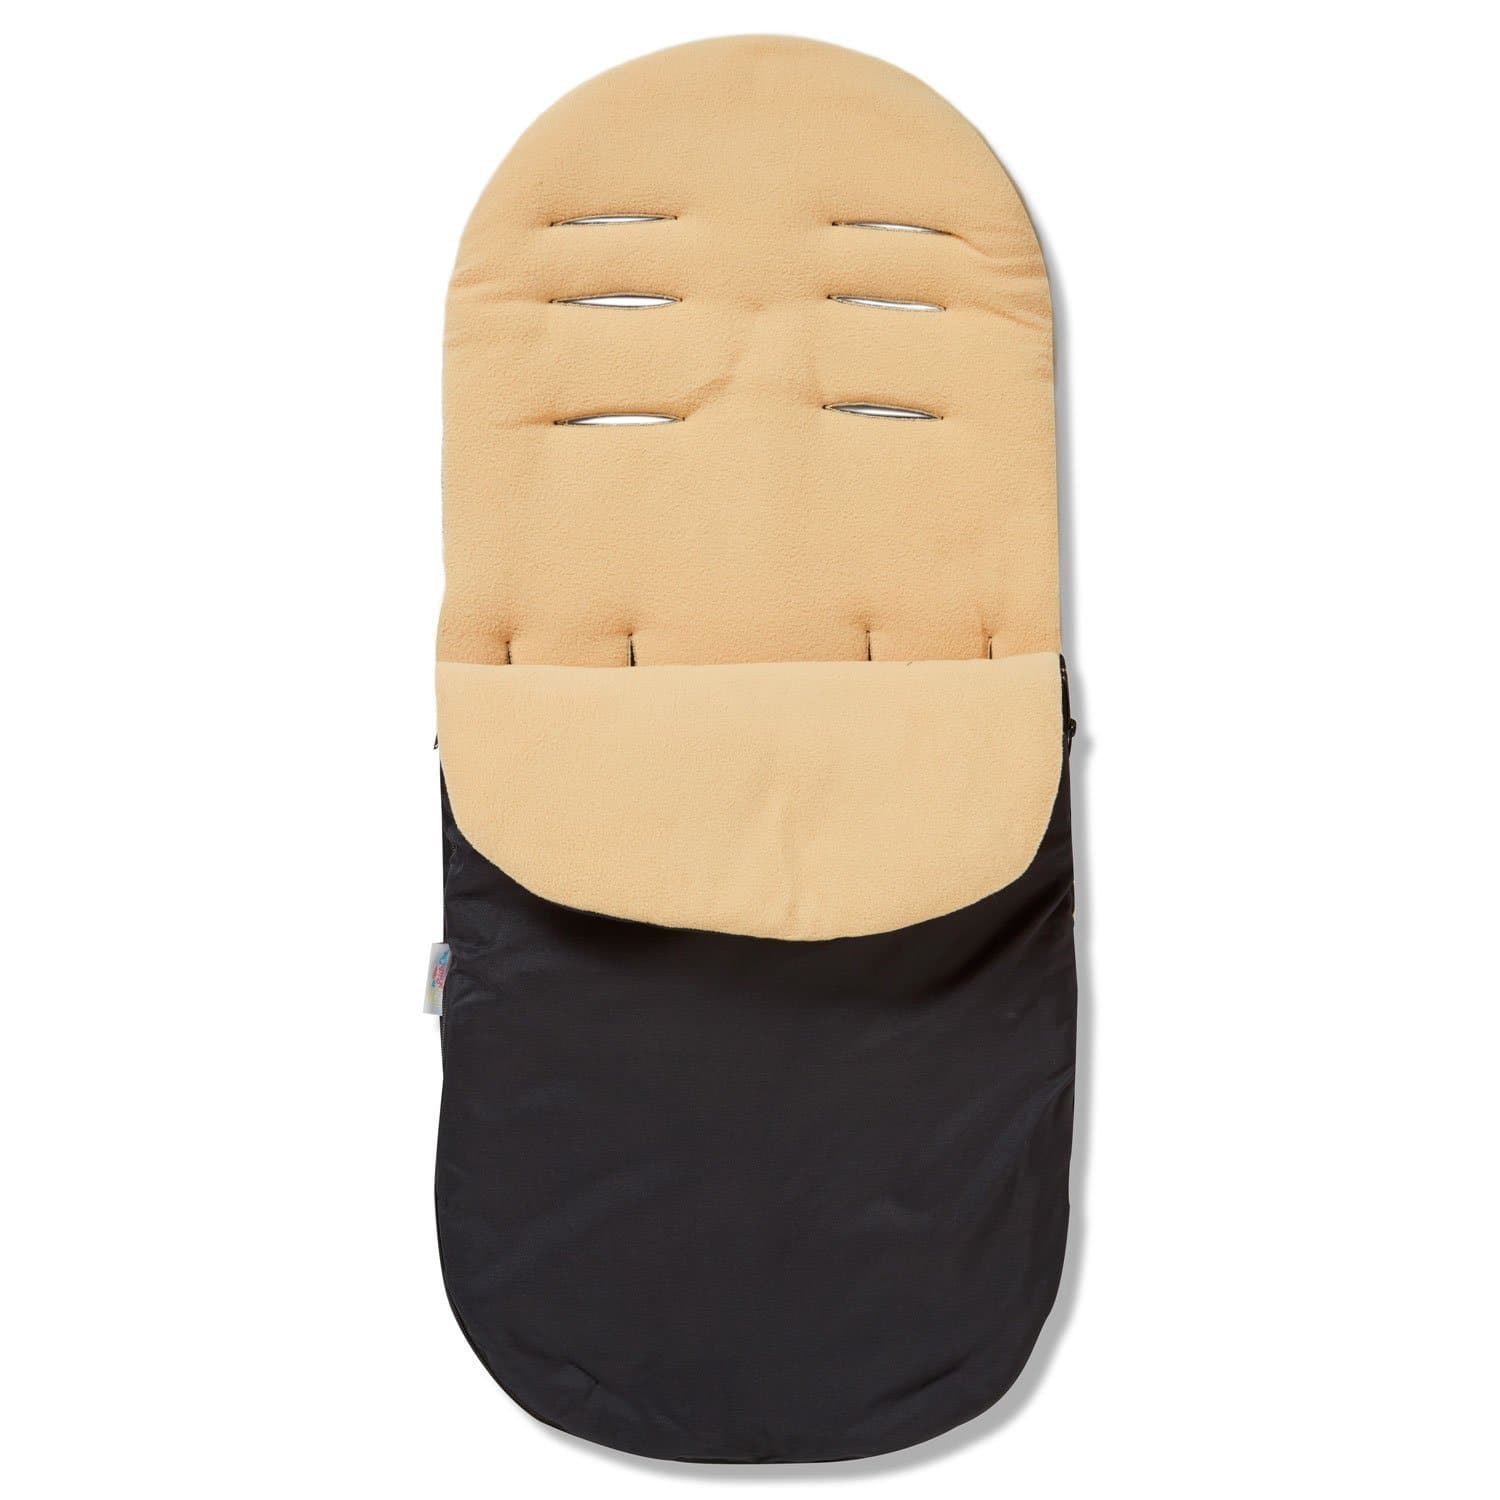 Footmuff / Cosy Toes Compatible with Noukies - Sand / Fits All Models | For Your Little One